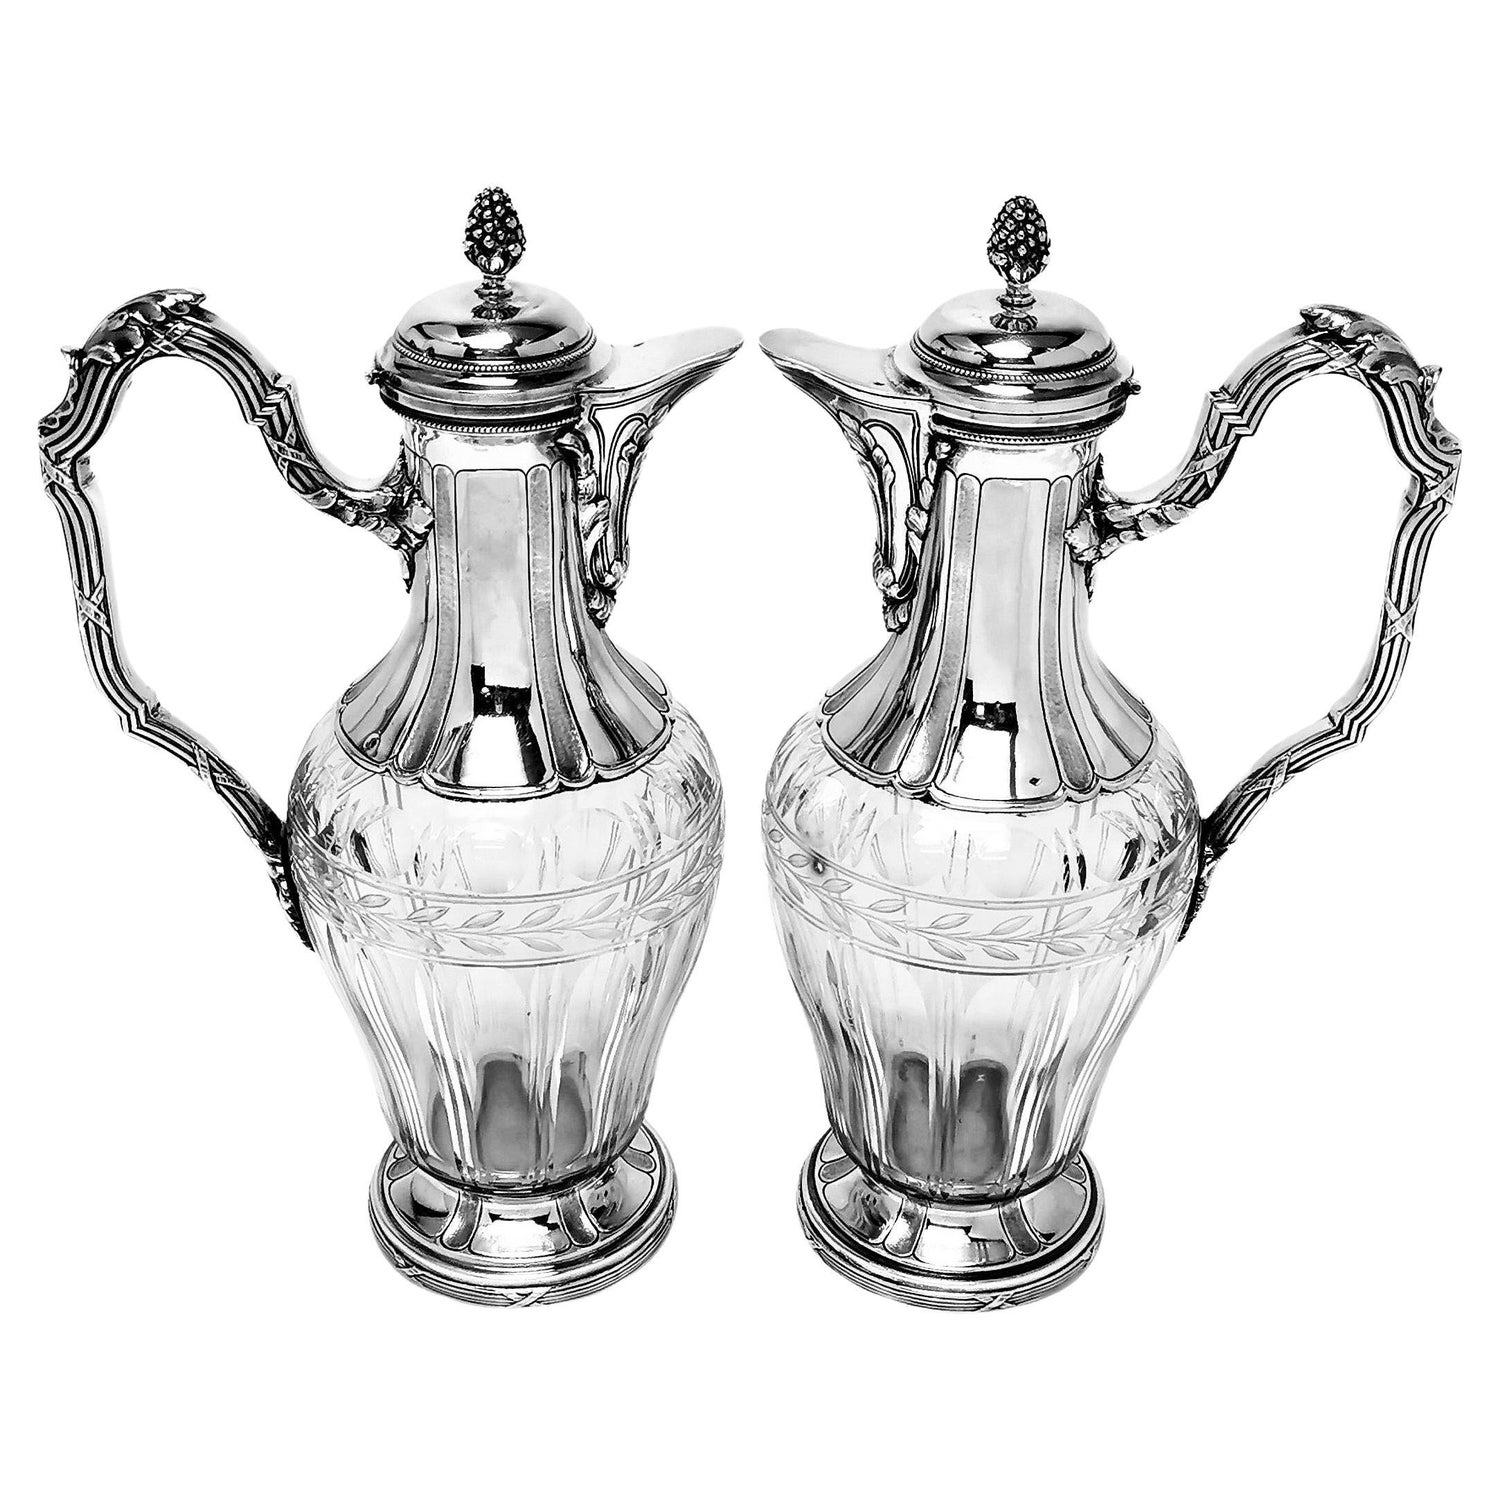 Pair Antique French Solid Silver & Glass Claret Jugs / Wine Decanters, c. 1890